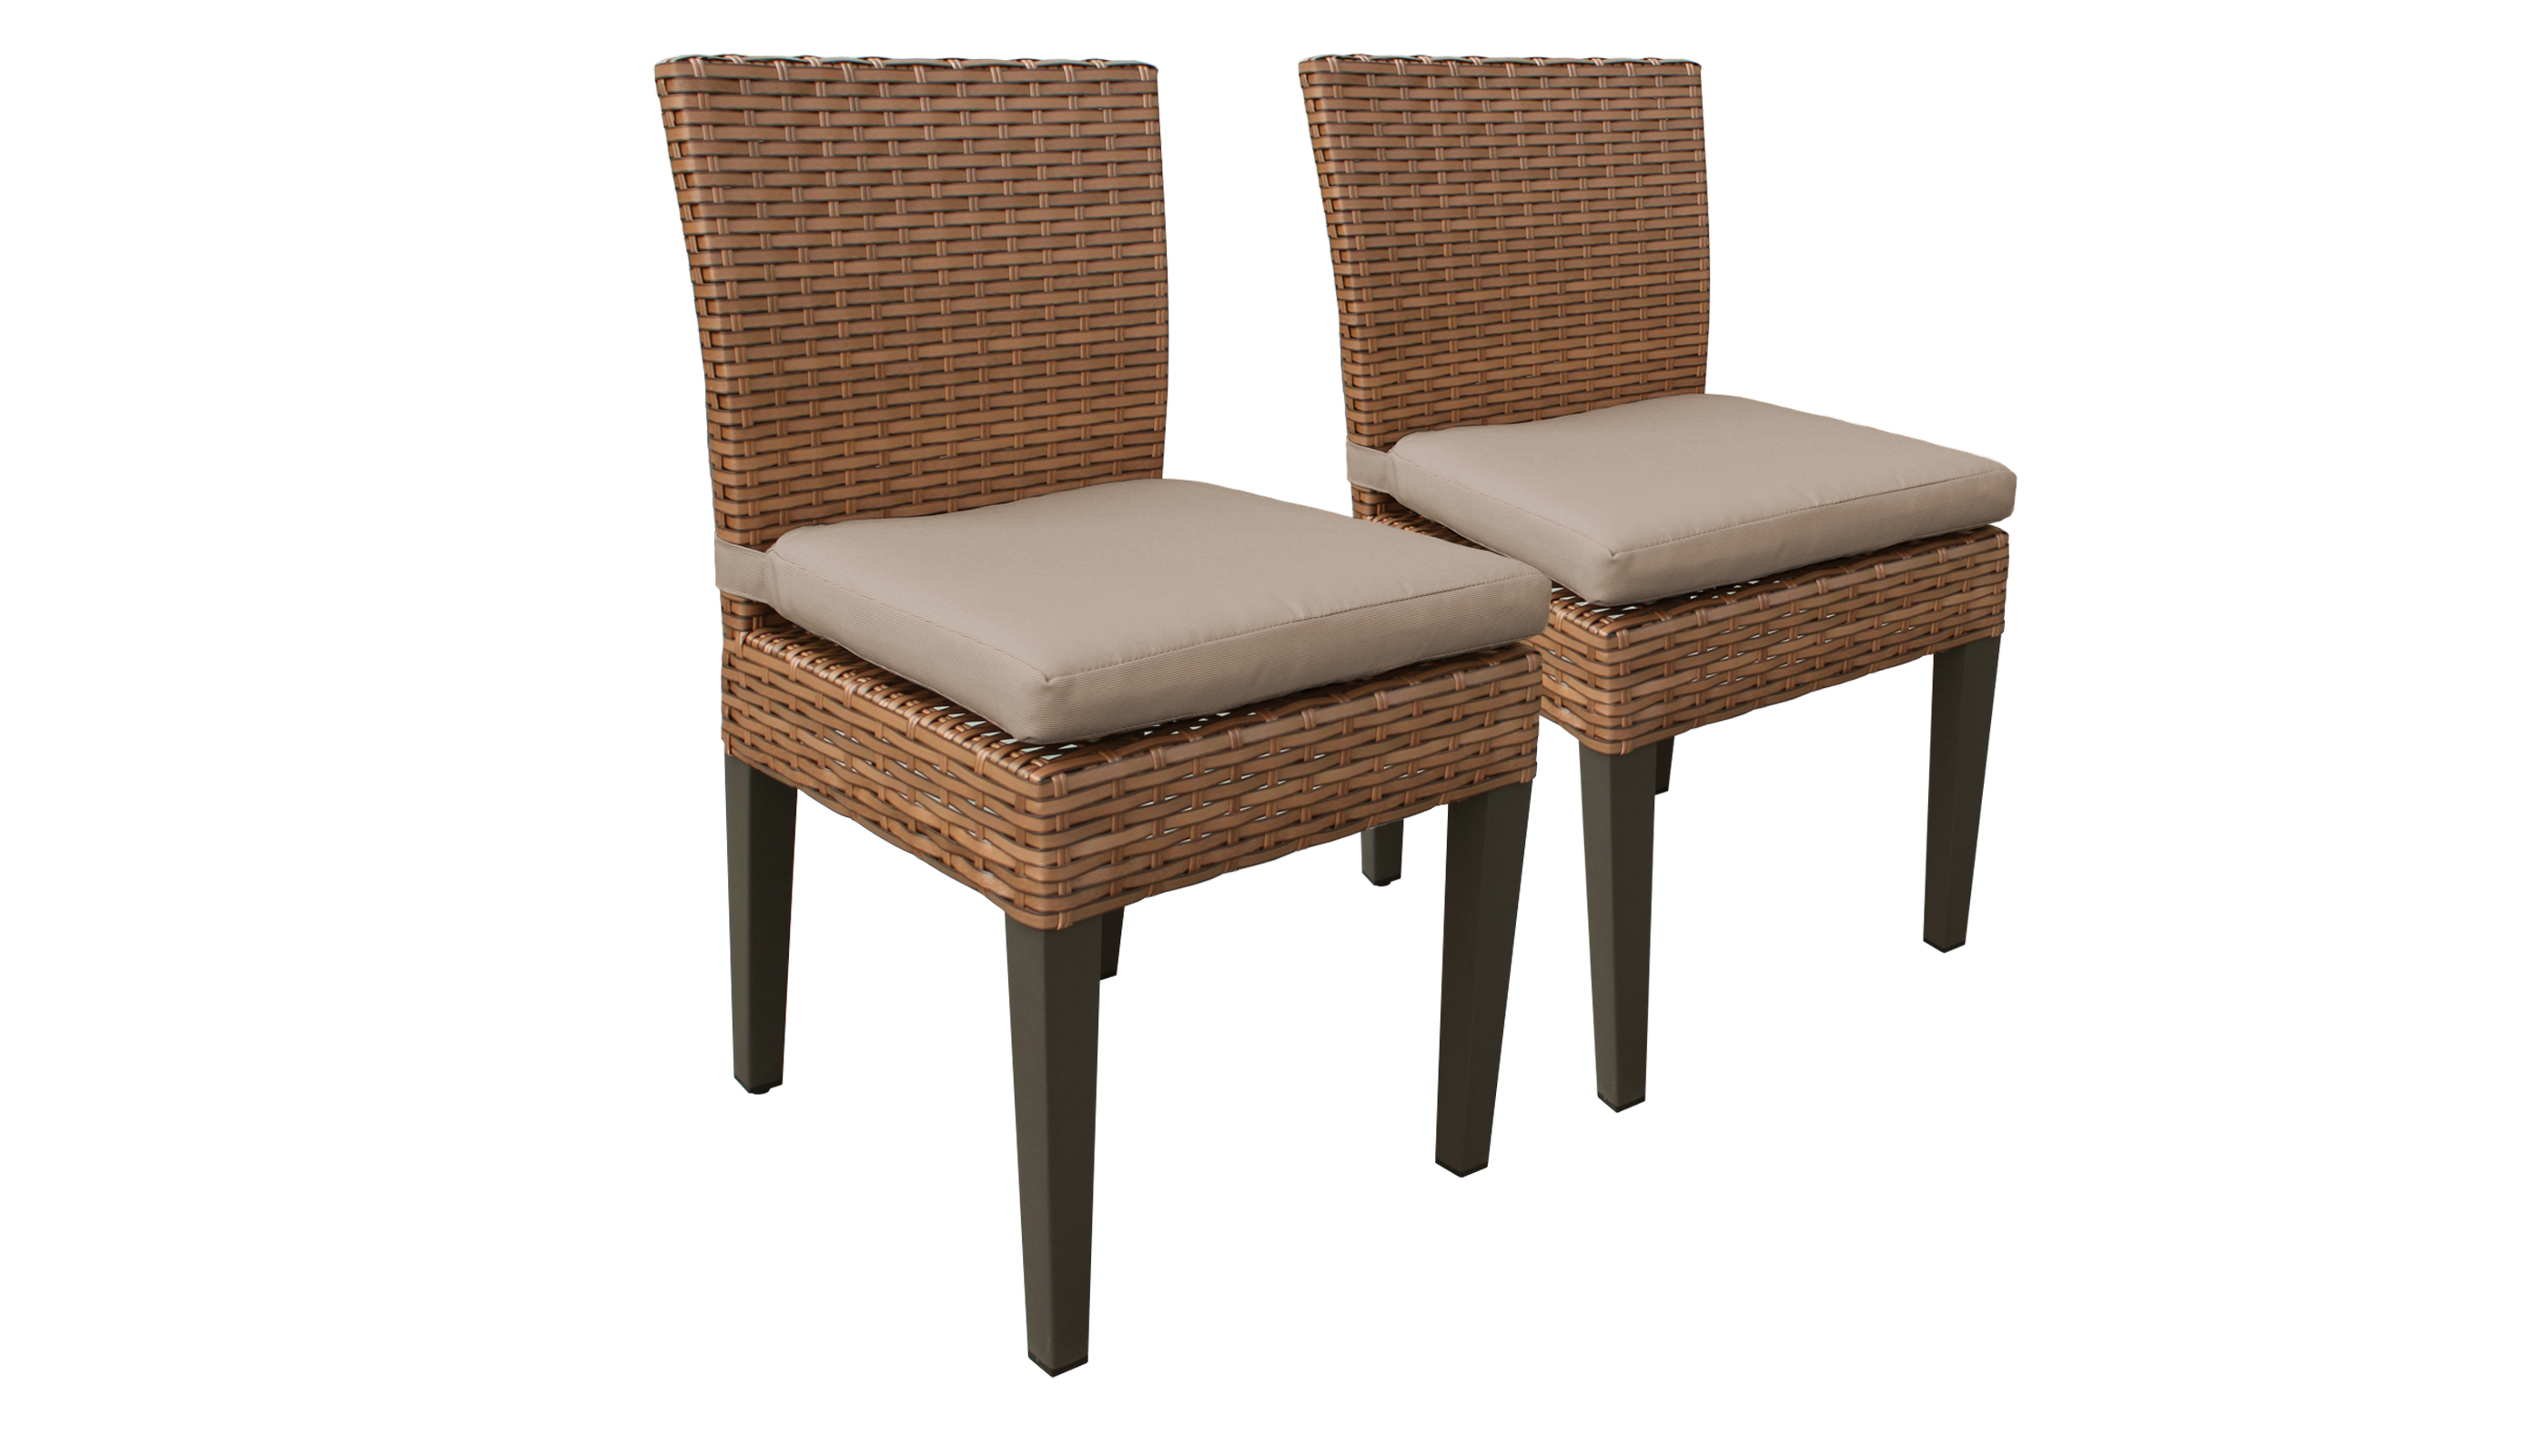 Laguna Rectangular Outdoor Patio Dining Table with with 4 ...